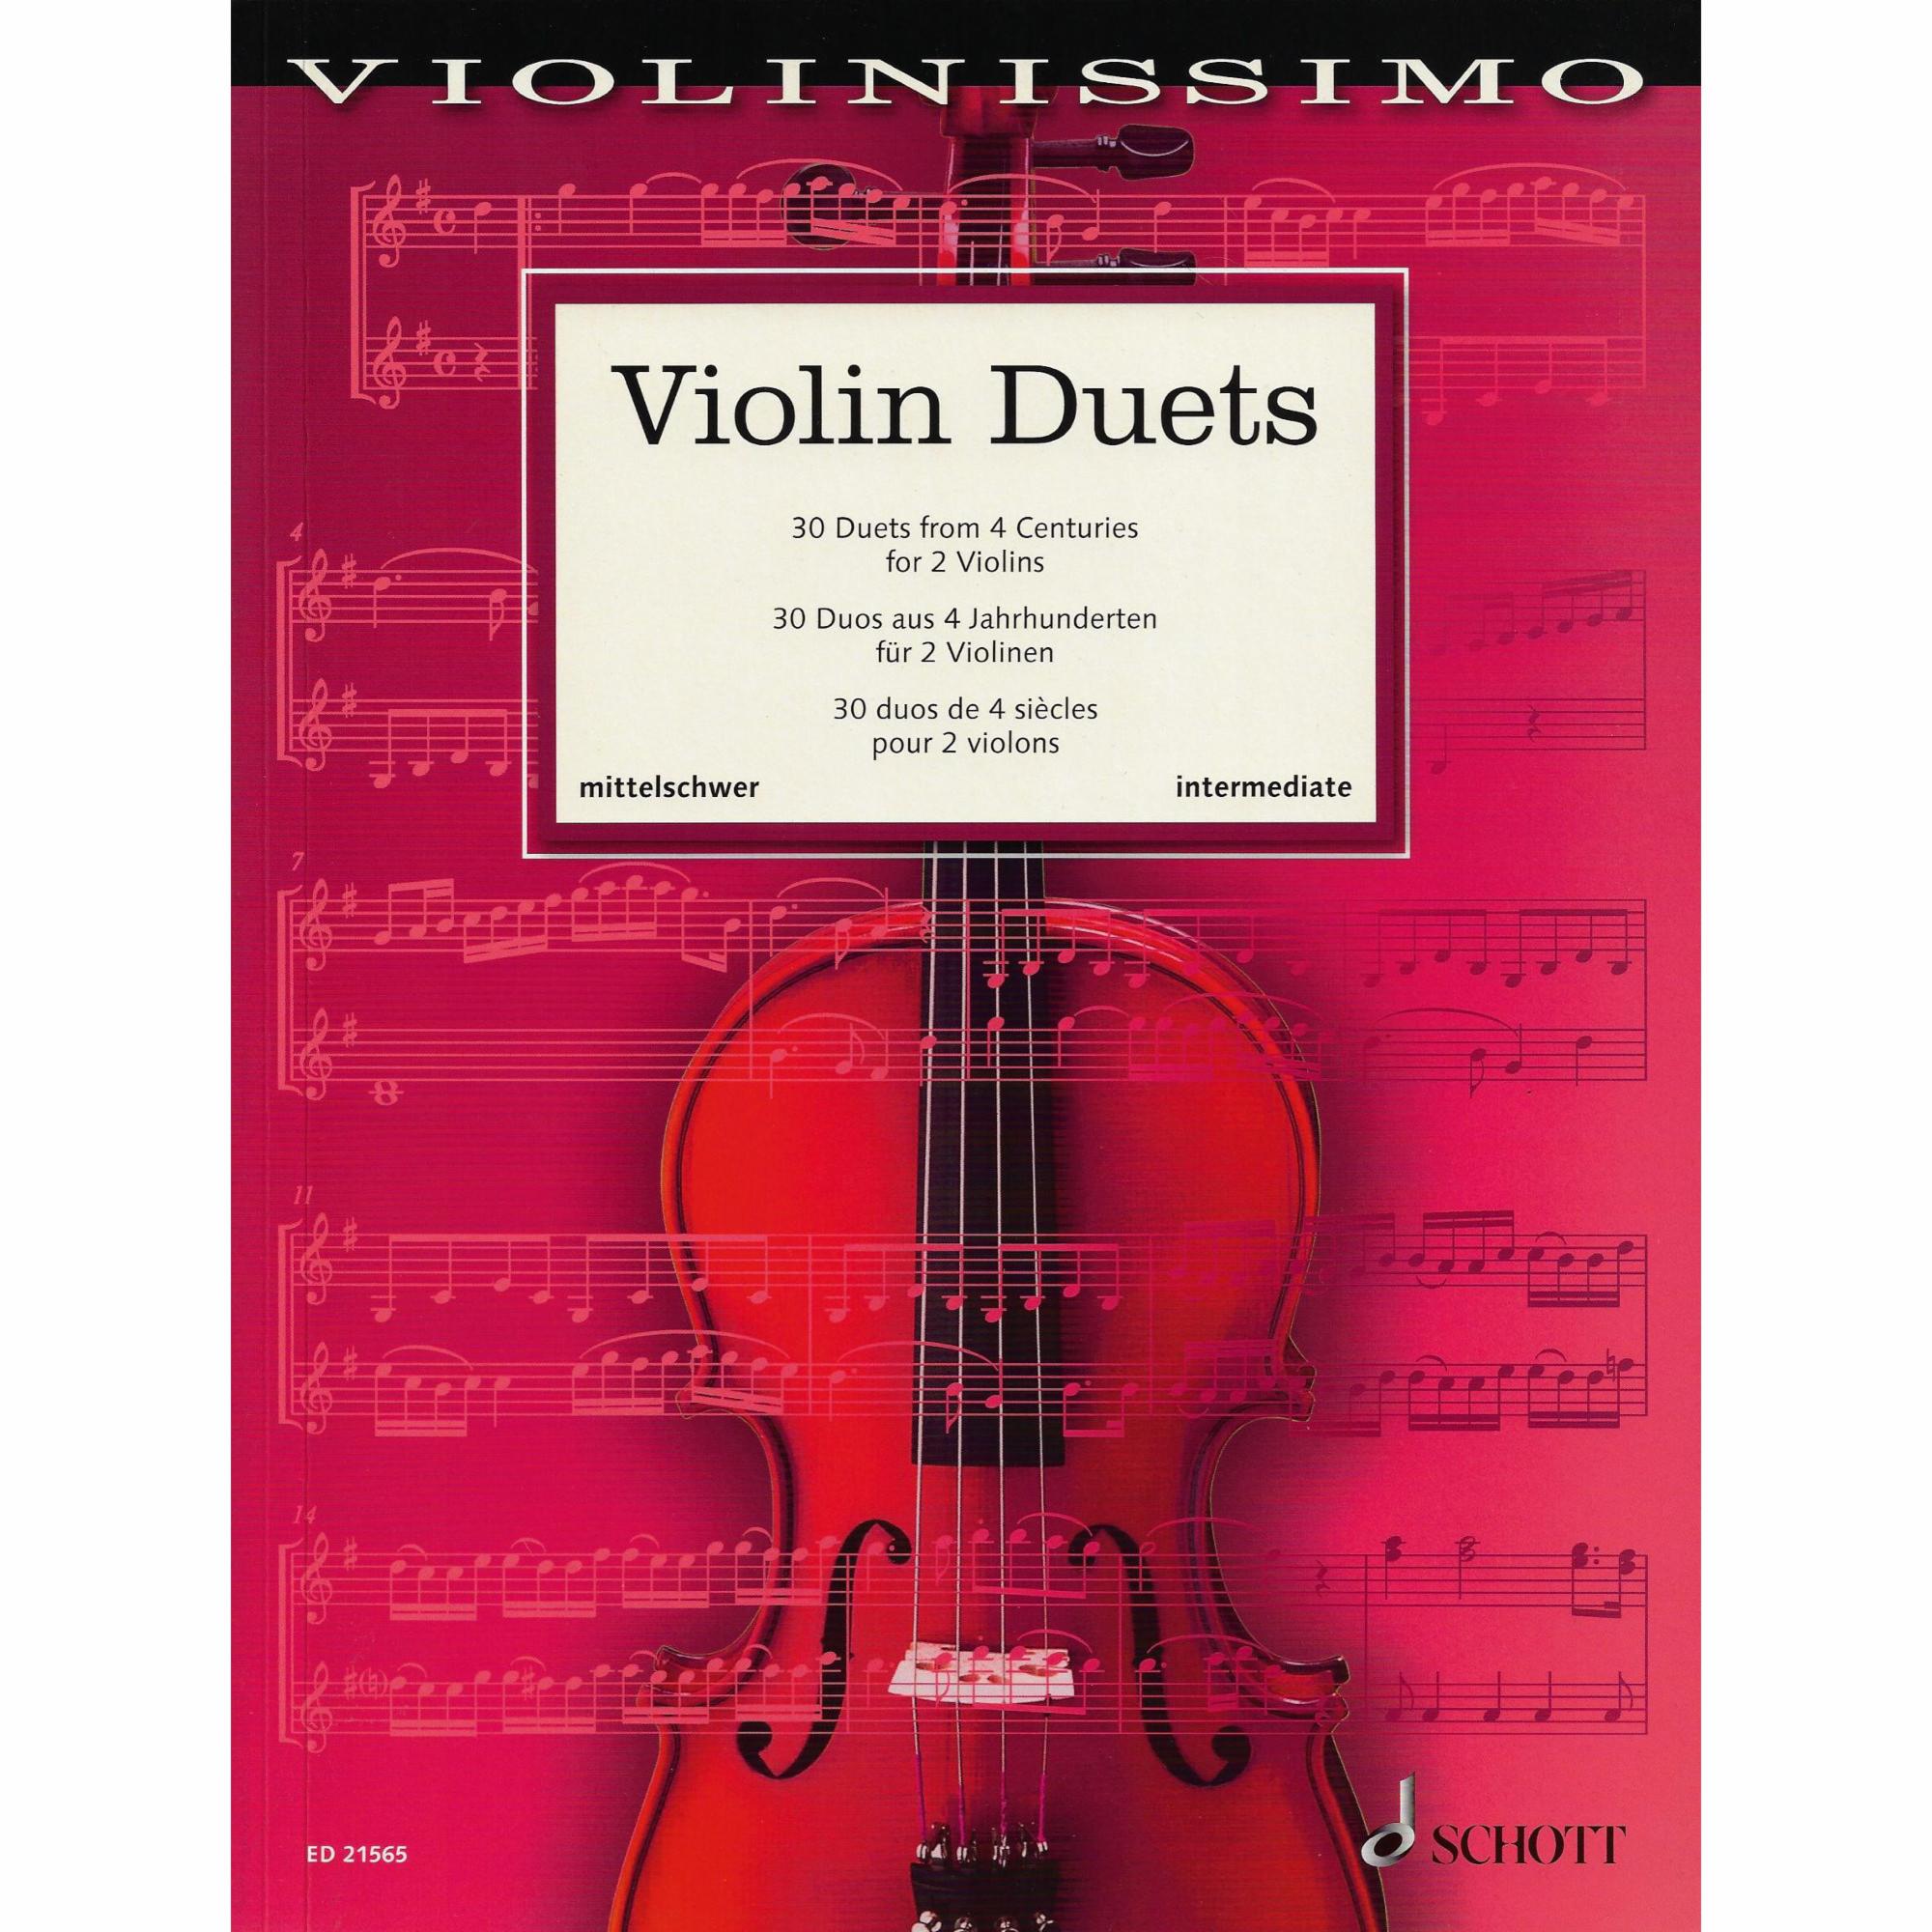 Violin Duets: 30 Duets from 4 Centuries